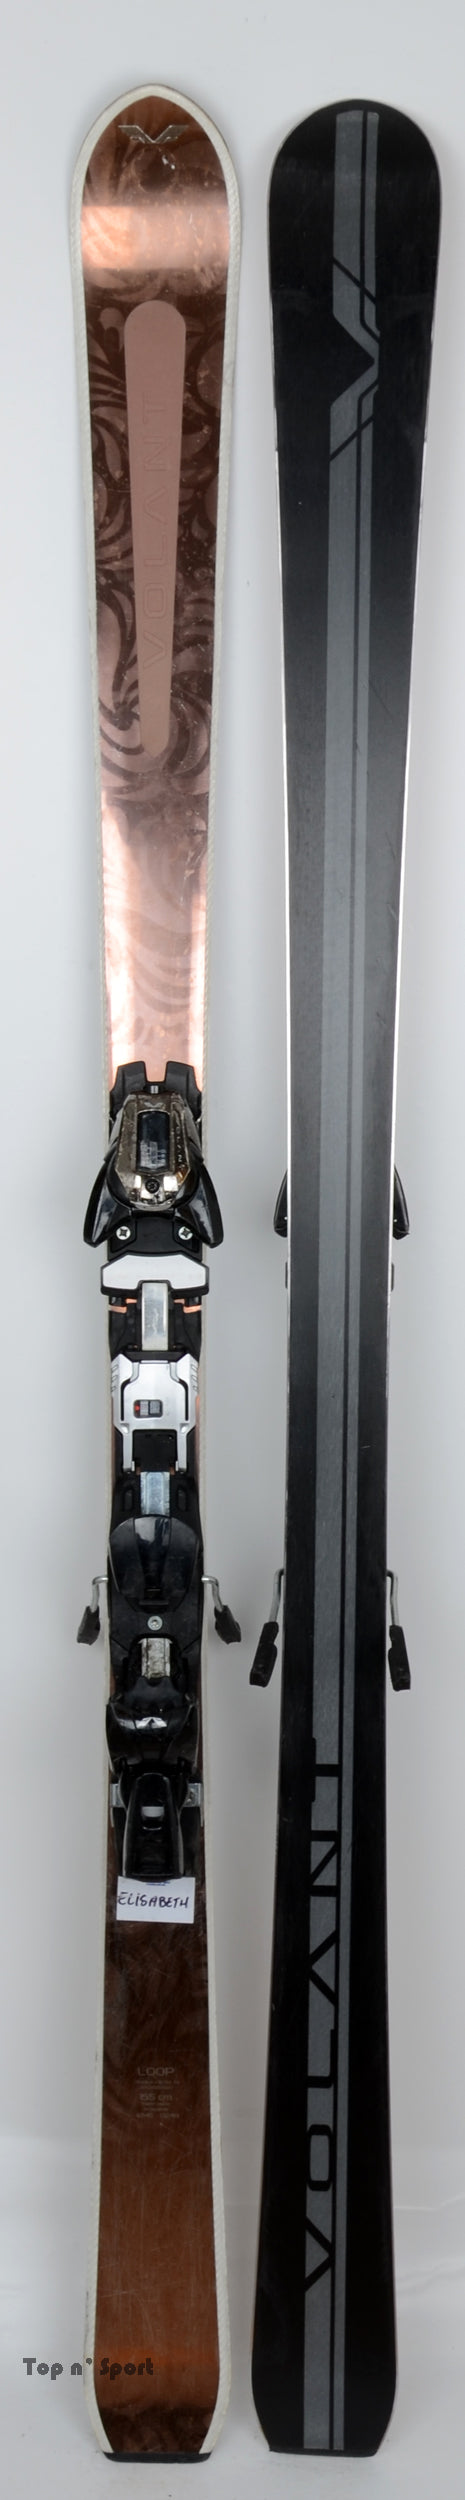 Volant LOOP 66 - skis d'occasion